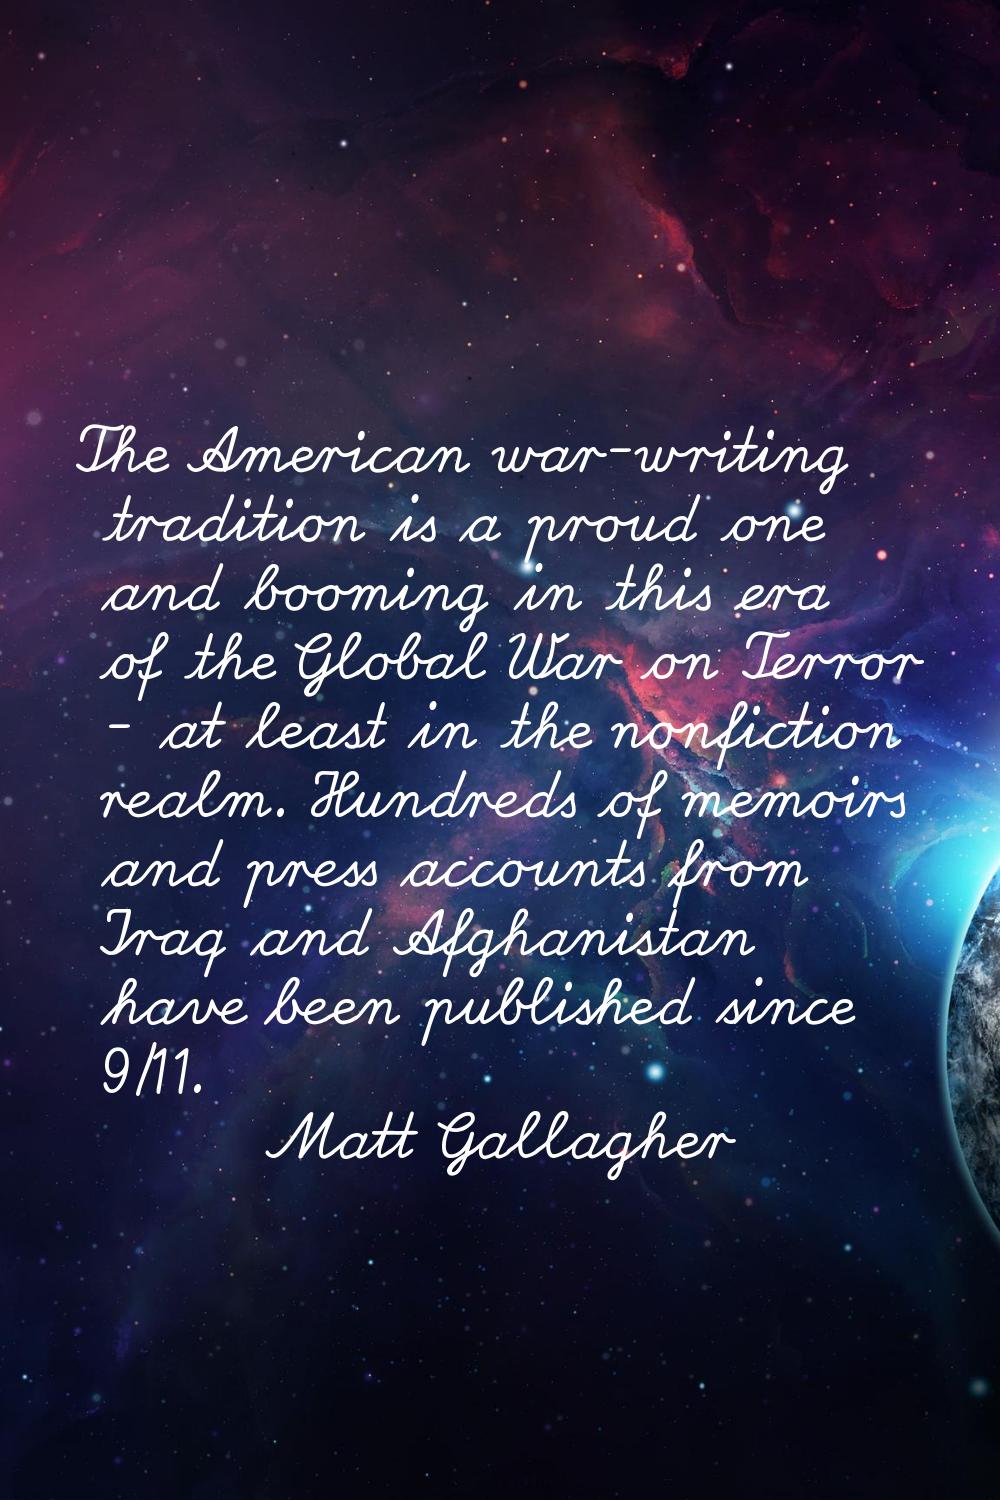 The American war-writing tradition is a proud one and booming in this era of the Global War on Terr